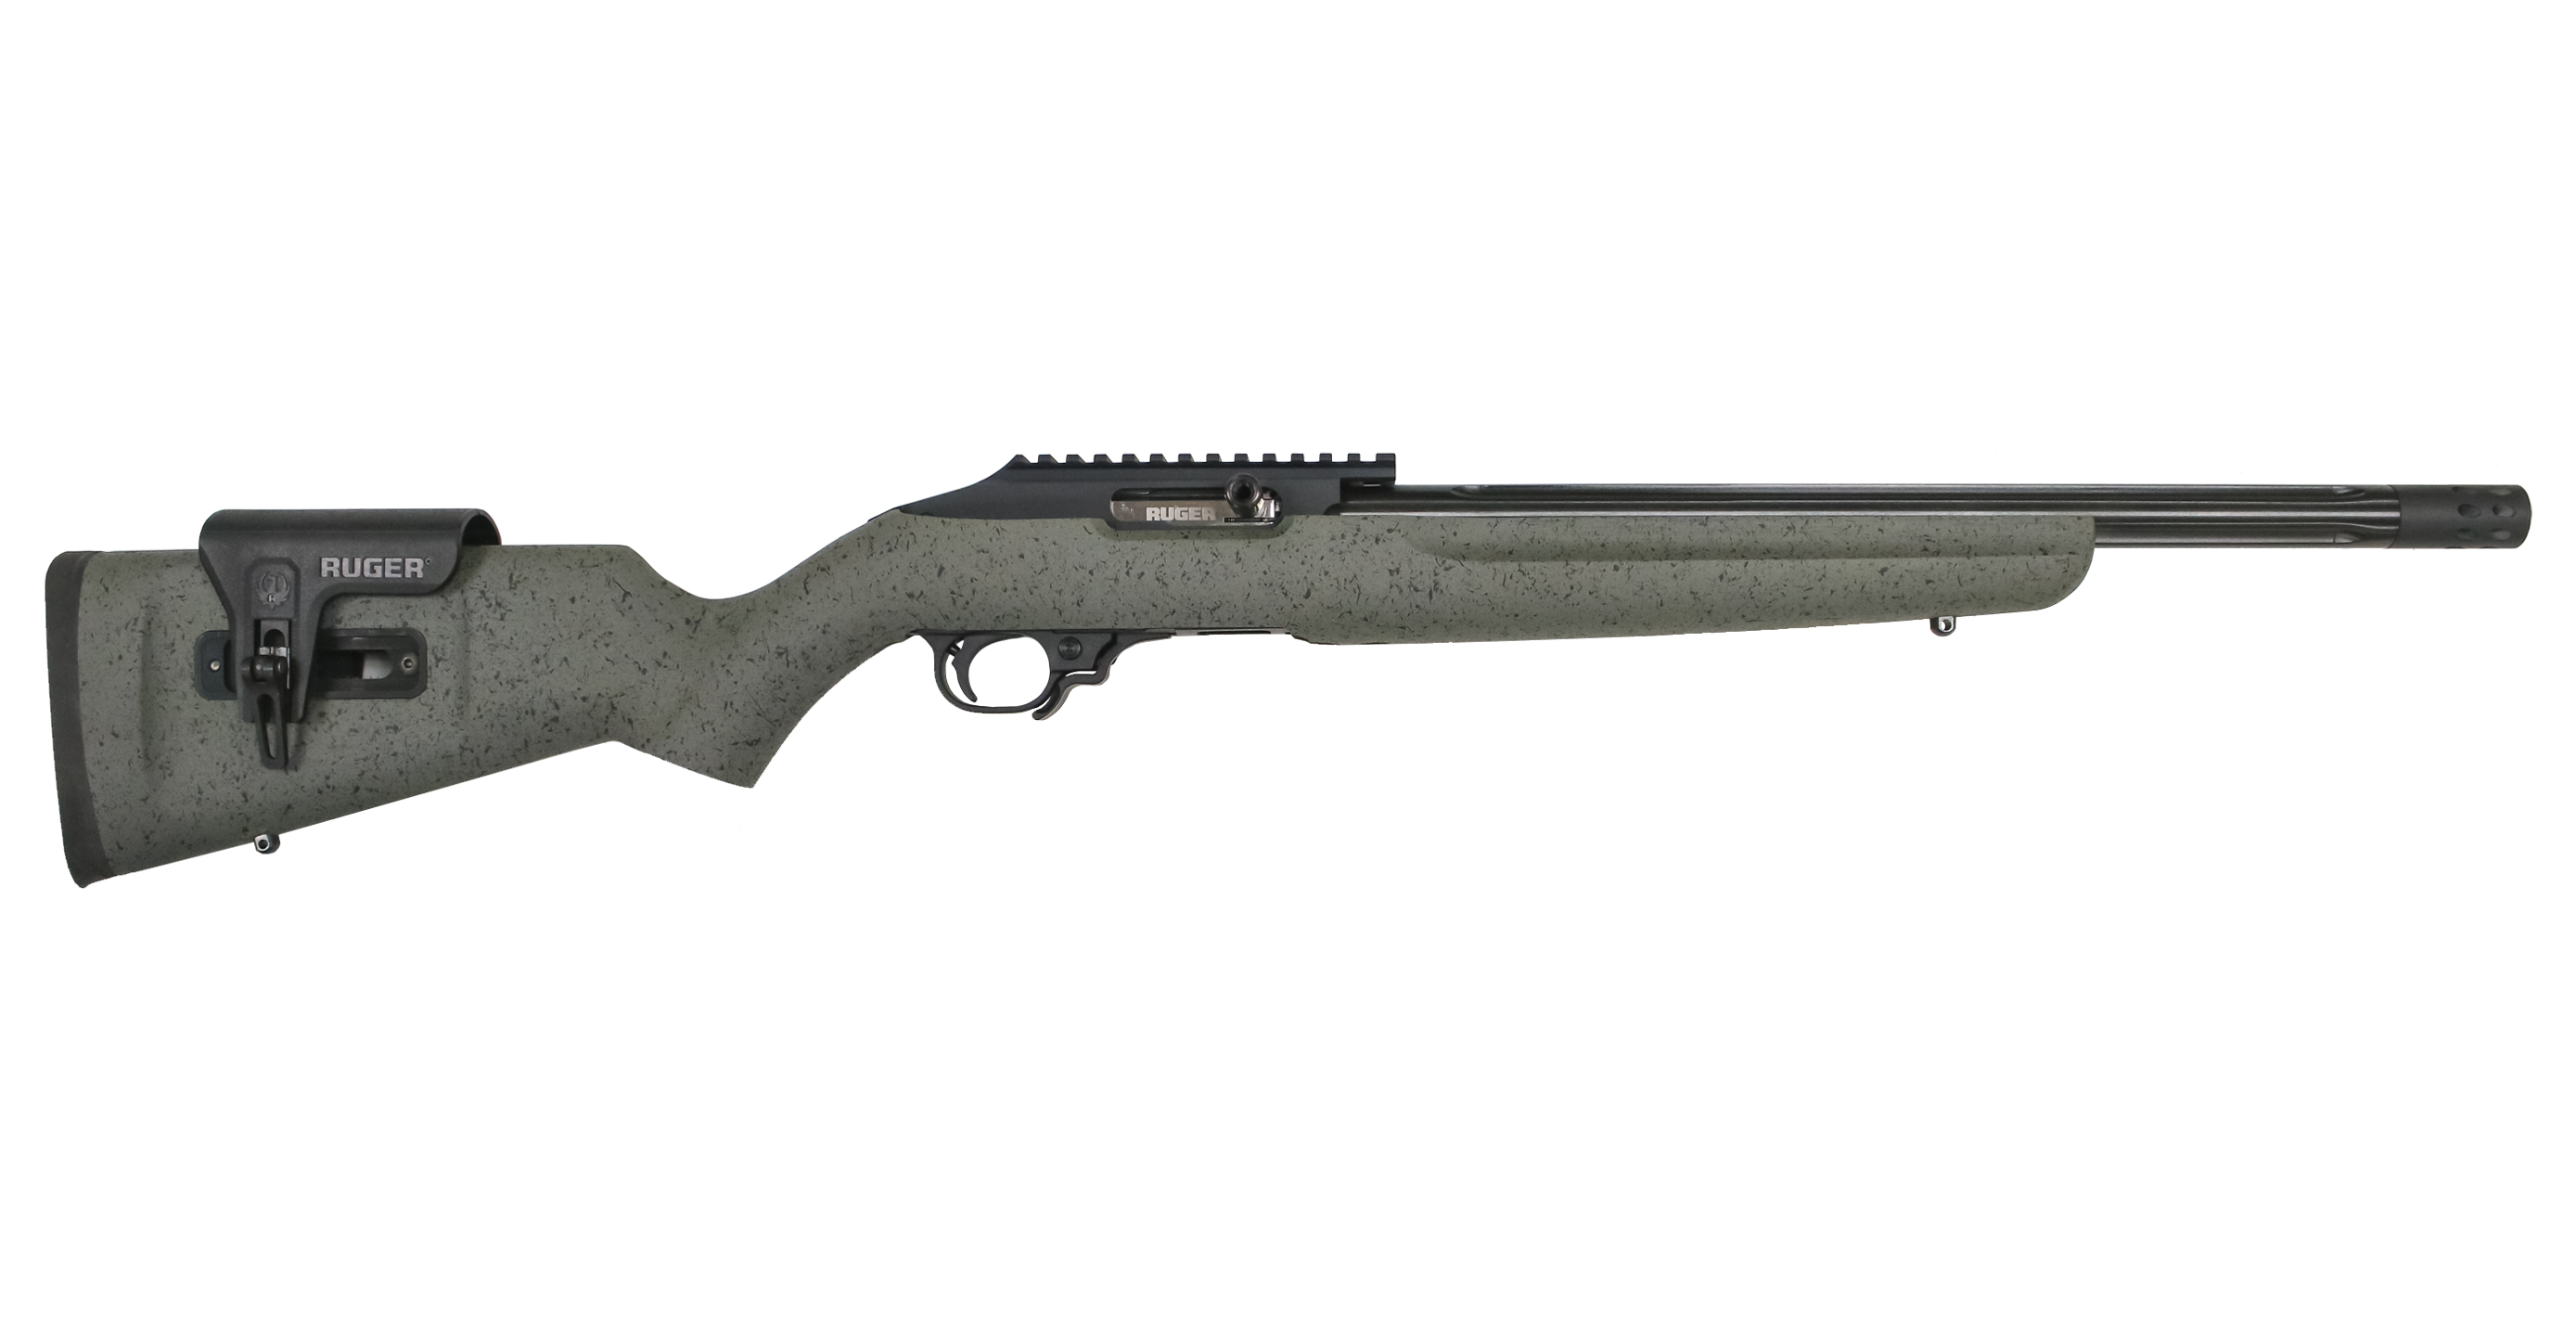 RUGER 10/22 22 LR SEMI-AUTO COMPETITION RIFLE WITH FLUTED BARREL